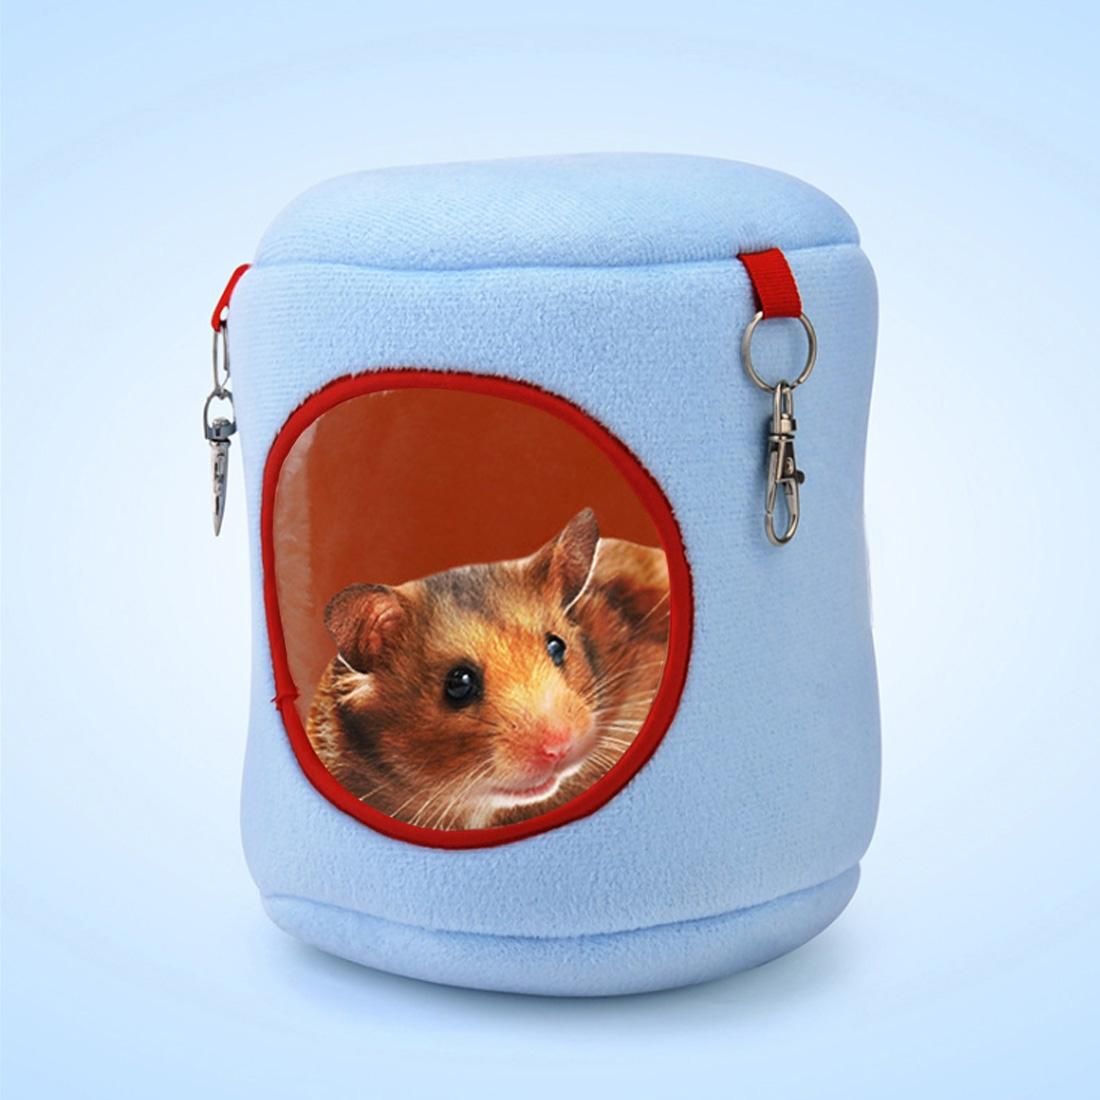 Flannel Cylinder Pet House Warm Hamster Hammock Hanging Bed Small Pets Nest, M, Size:10*12*12cm (Blue)